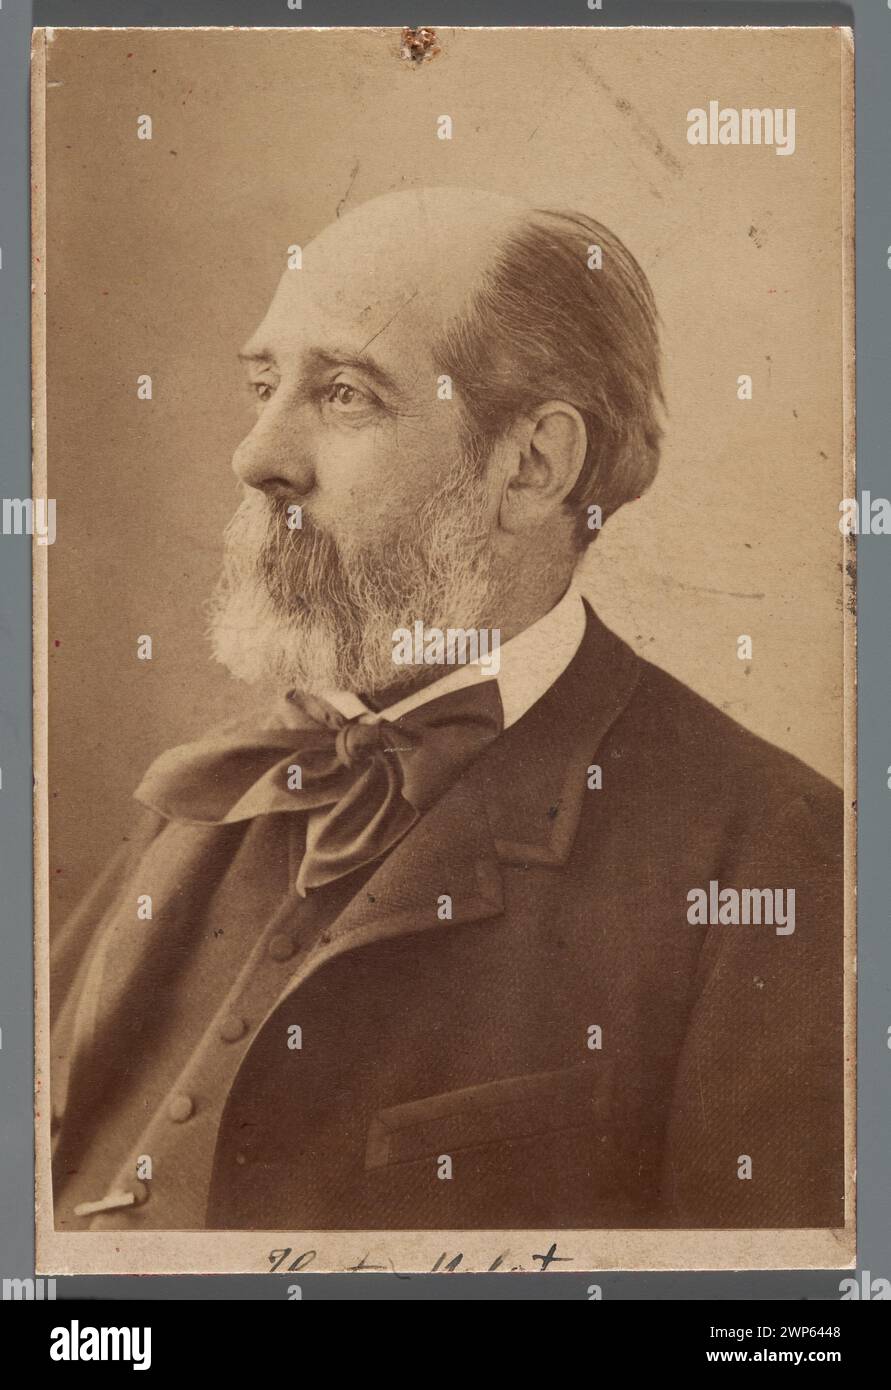 Portrait of Hector Malot (1830-1907), French writer (bust); Nadar (couples around 1885 (1875-00-00-1900-00-00);Rajchman, Aleksander (1855-1915) - collection, portraits, portraits of men Stock Photo